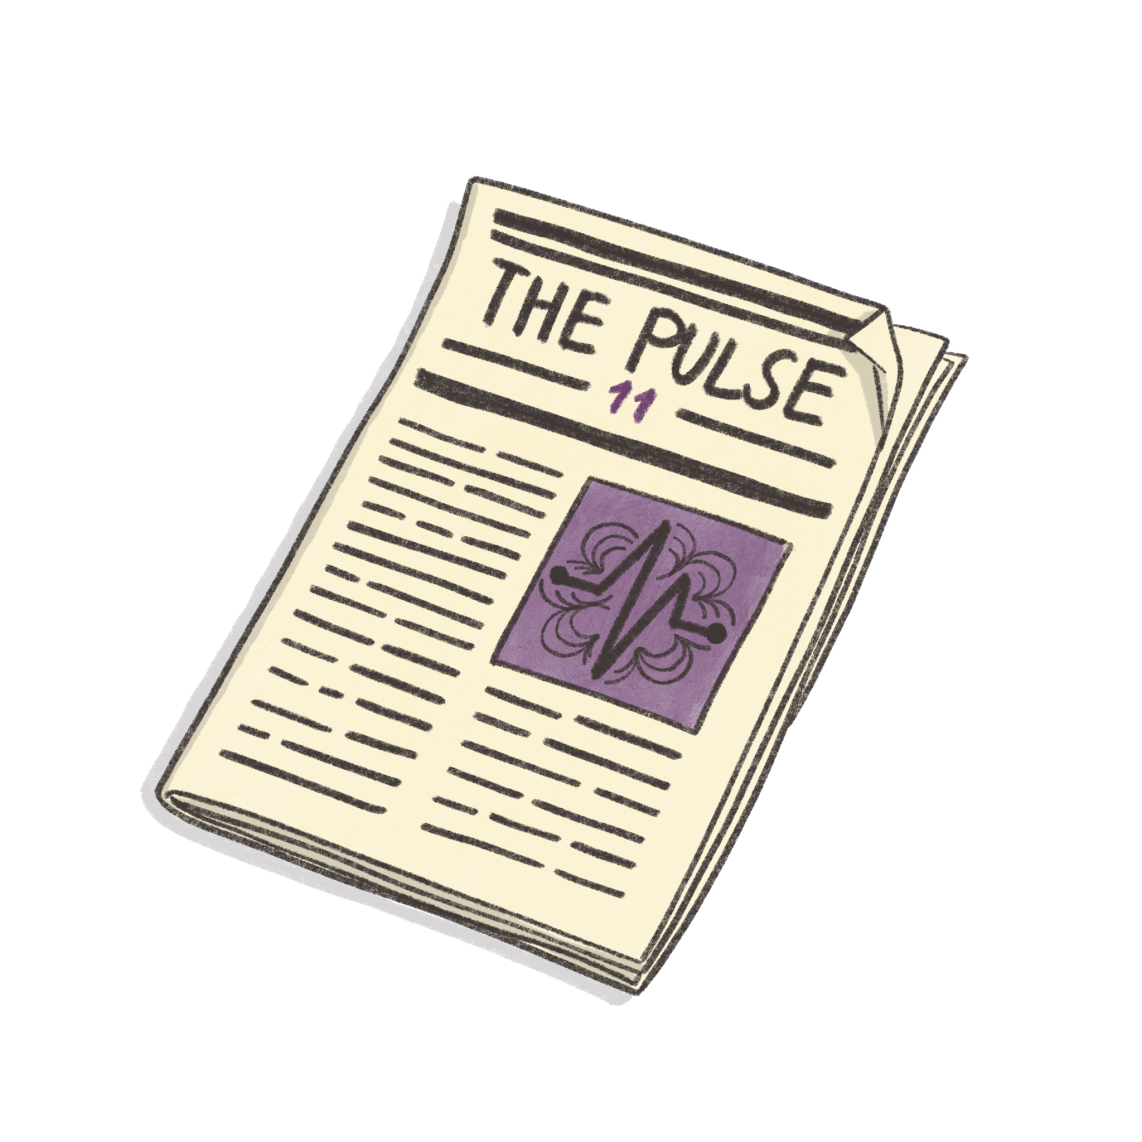 The Apoio Pulse – Issue 11